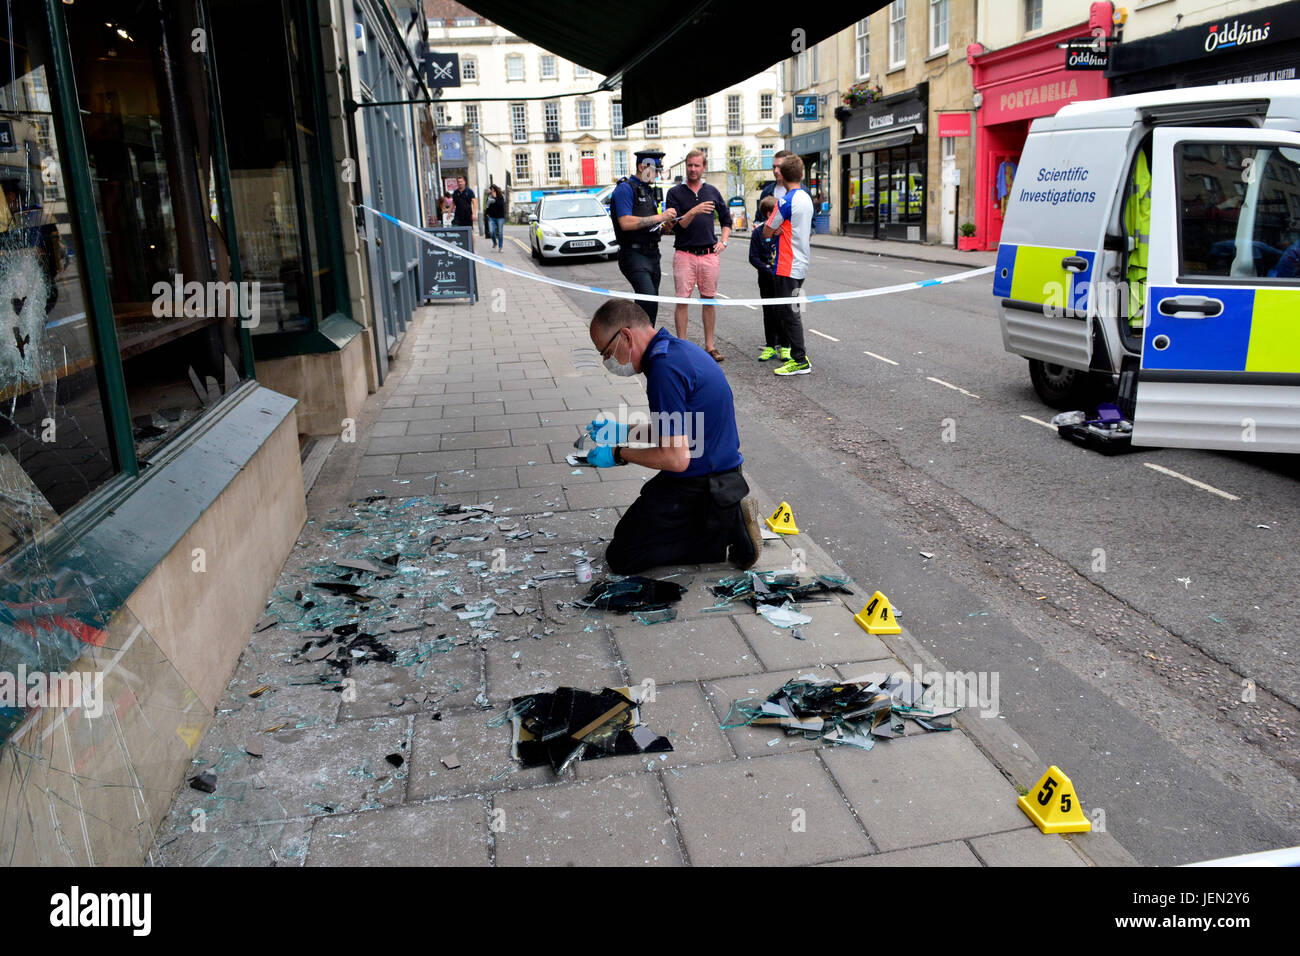 Bristol, UK. 26th June,  2017. People reported seeing armed men on motorbikes smash the windows of Grey-Harris and Co Jewelers and make off at speed with jewellery. Princess Victoria Street was closed while forensic team sifted through the damaged jewelers. John Woodcock who works nearby Johnson's cleaners,described the moment a man with an Axe came towards him. The afternoon was packed with shoppers. Credit: Robert Timoney/Alamy Live News Stock Photo